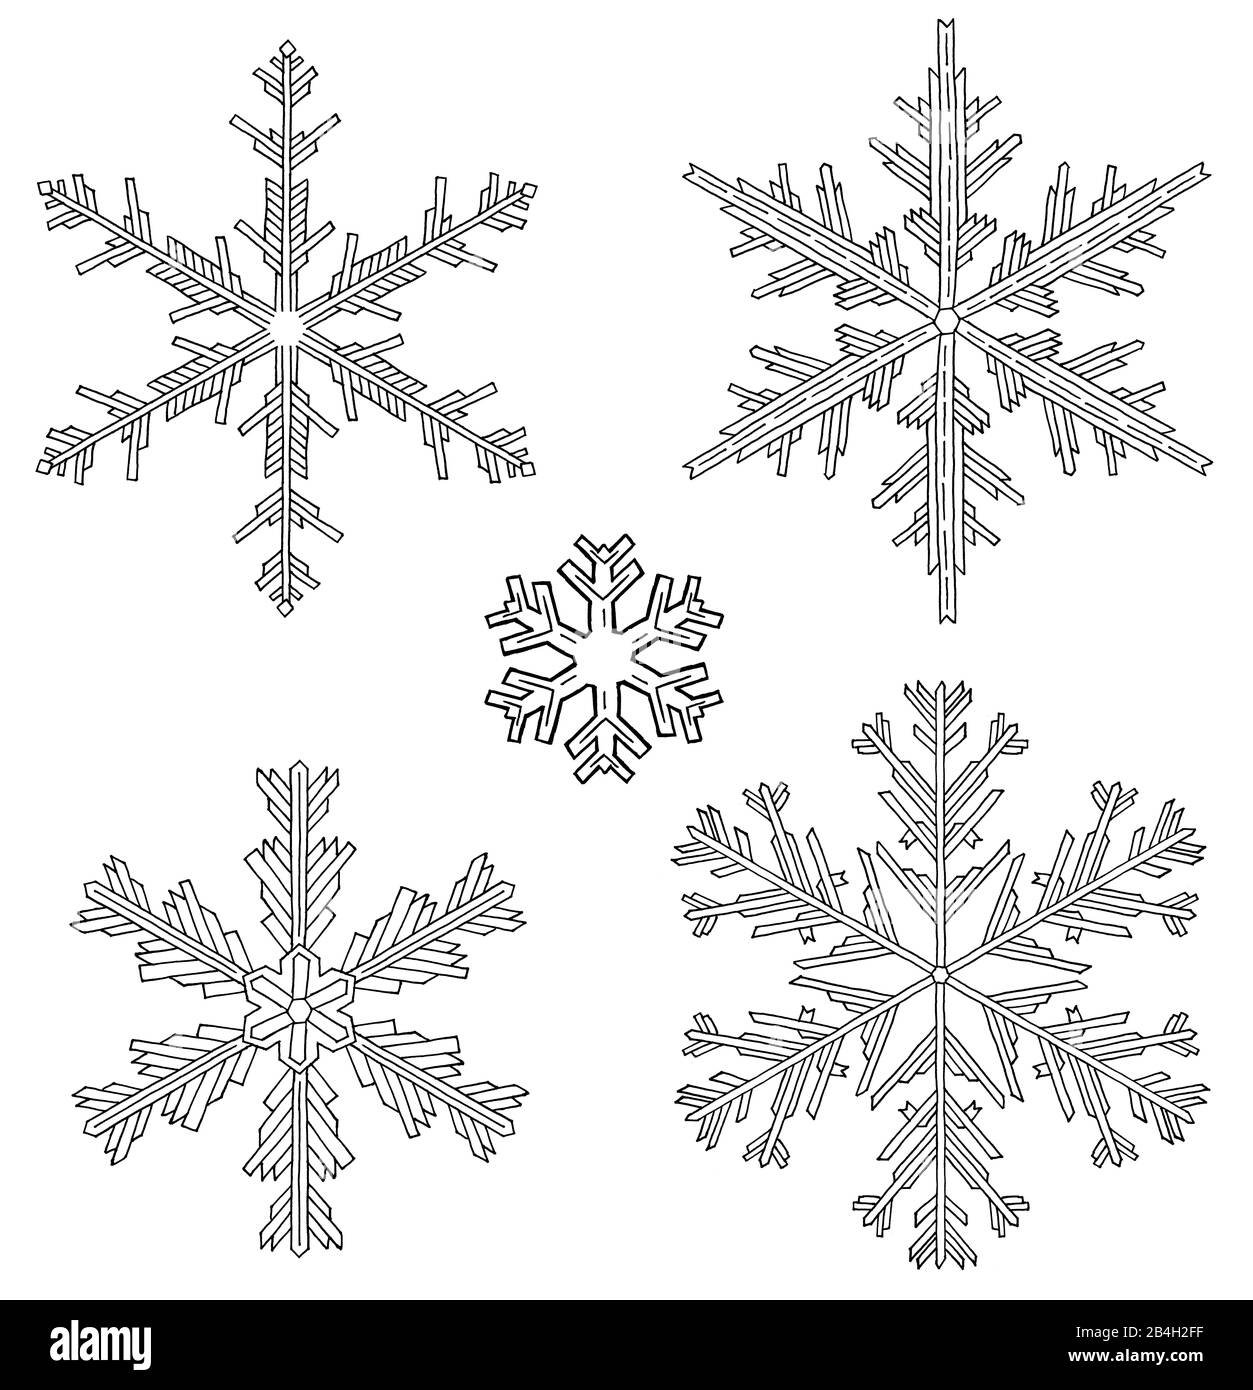 Drawn snowflakes in black and white in front of isolated, white background for coloring Stock Photo